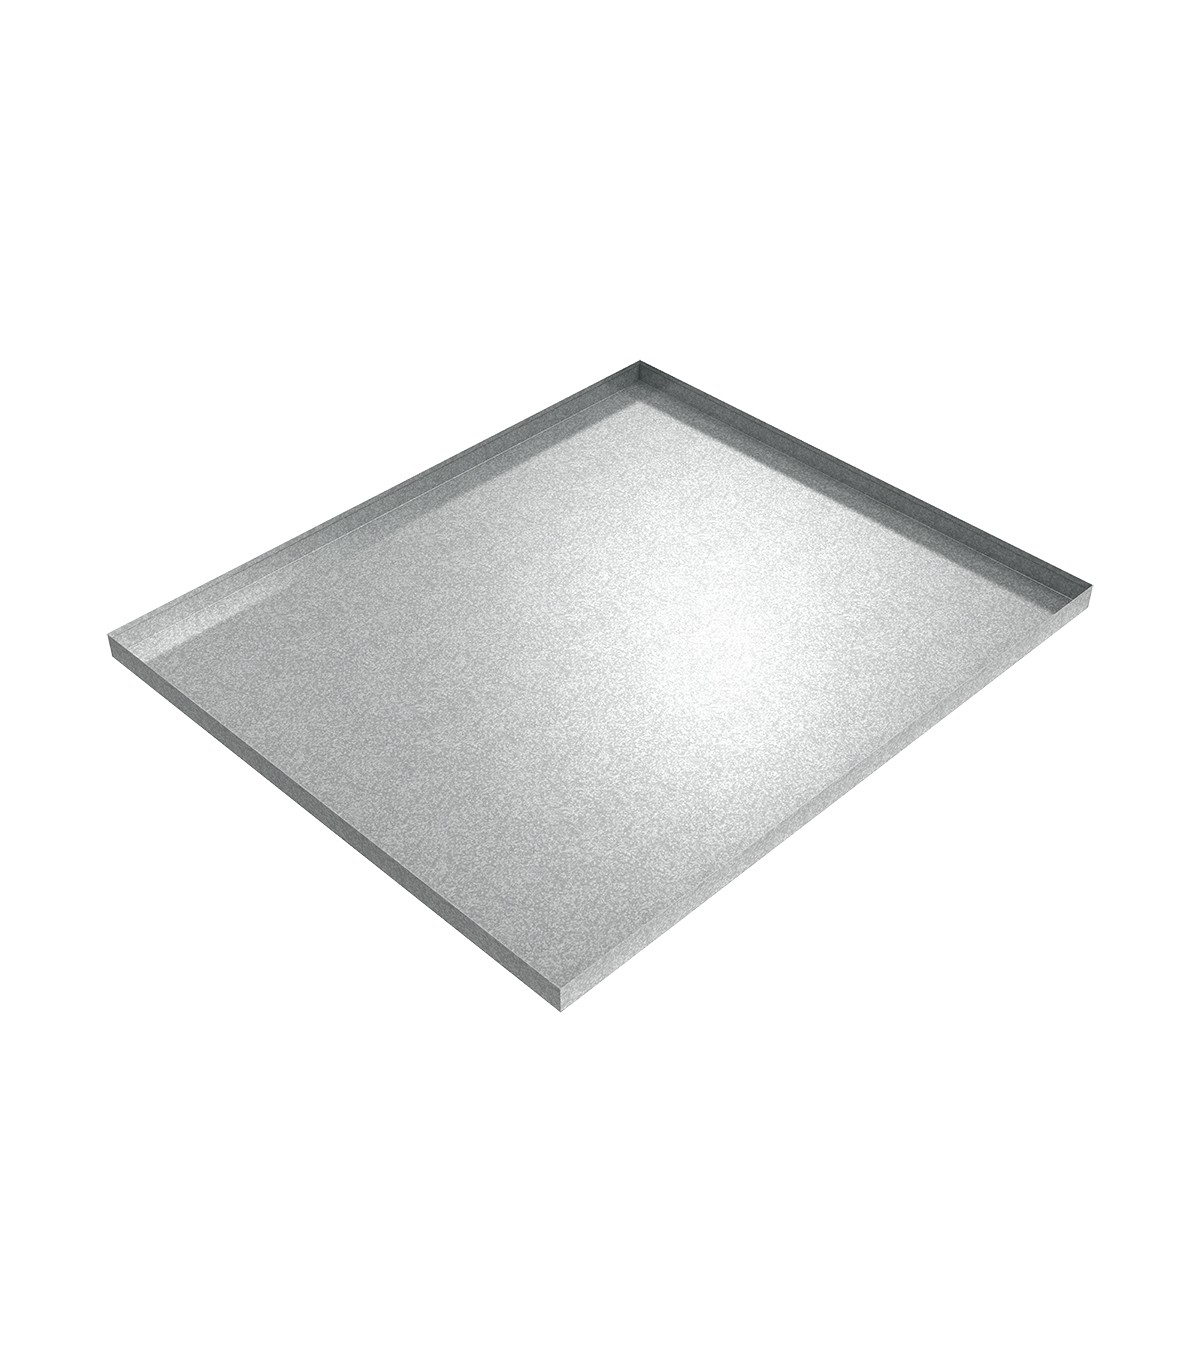 Oil Drip Pan Galvanized Tray Metal Large For Under Car Garage Floors Automotive 